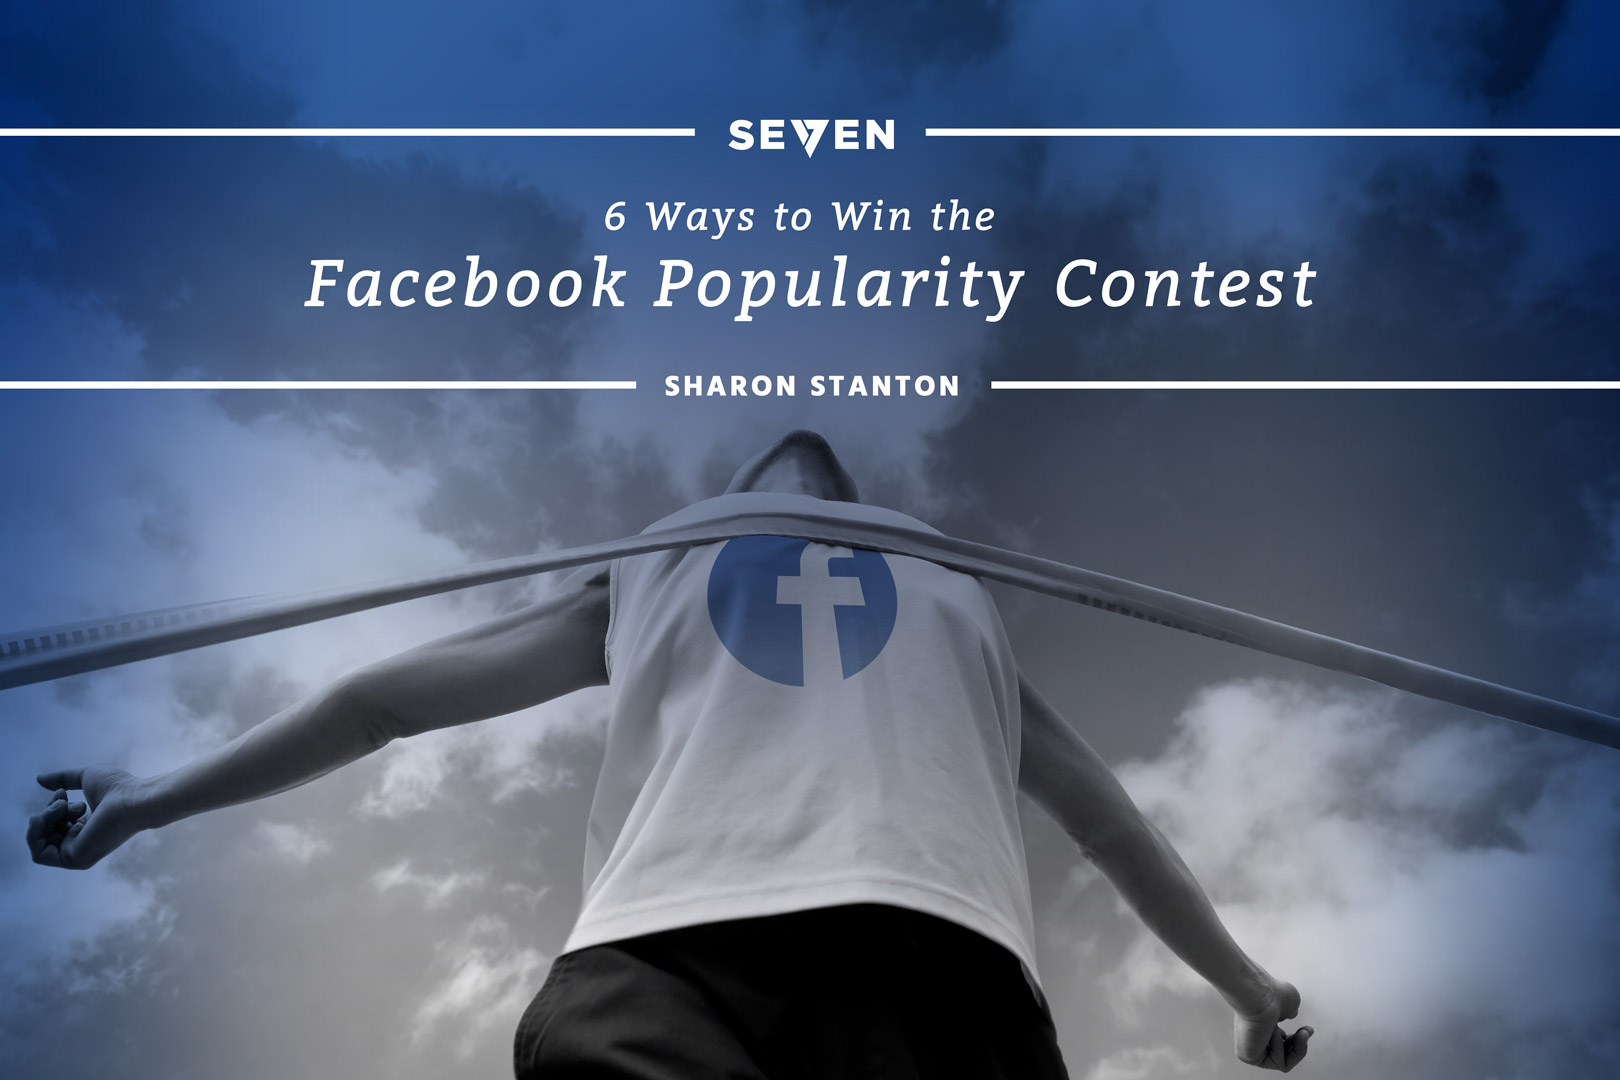 6 Ways To Win the Facebook Popularity Contest